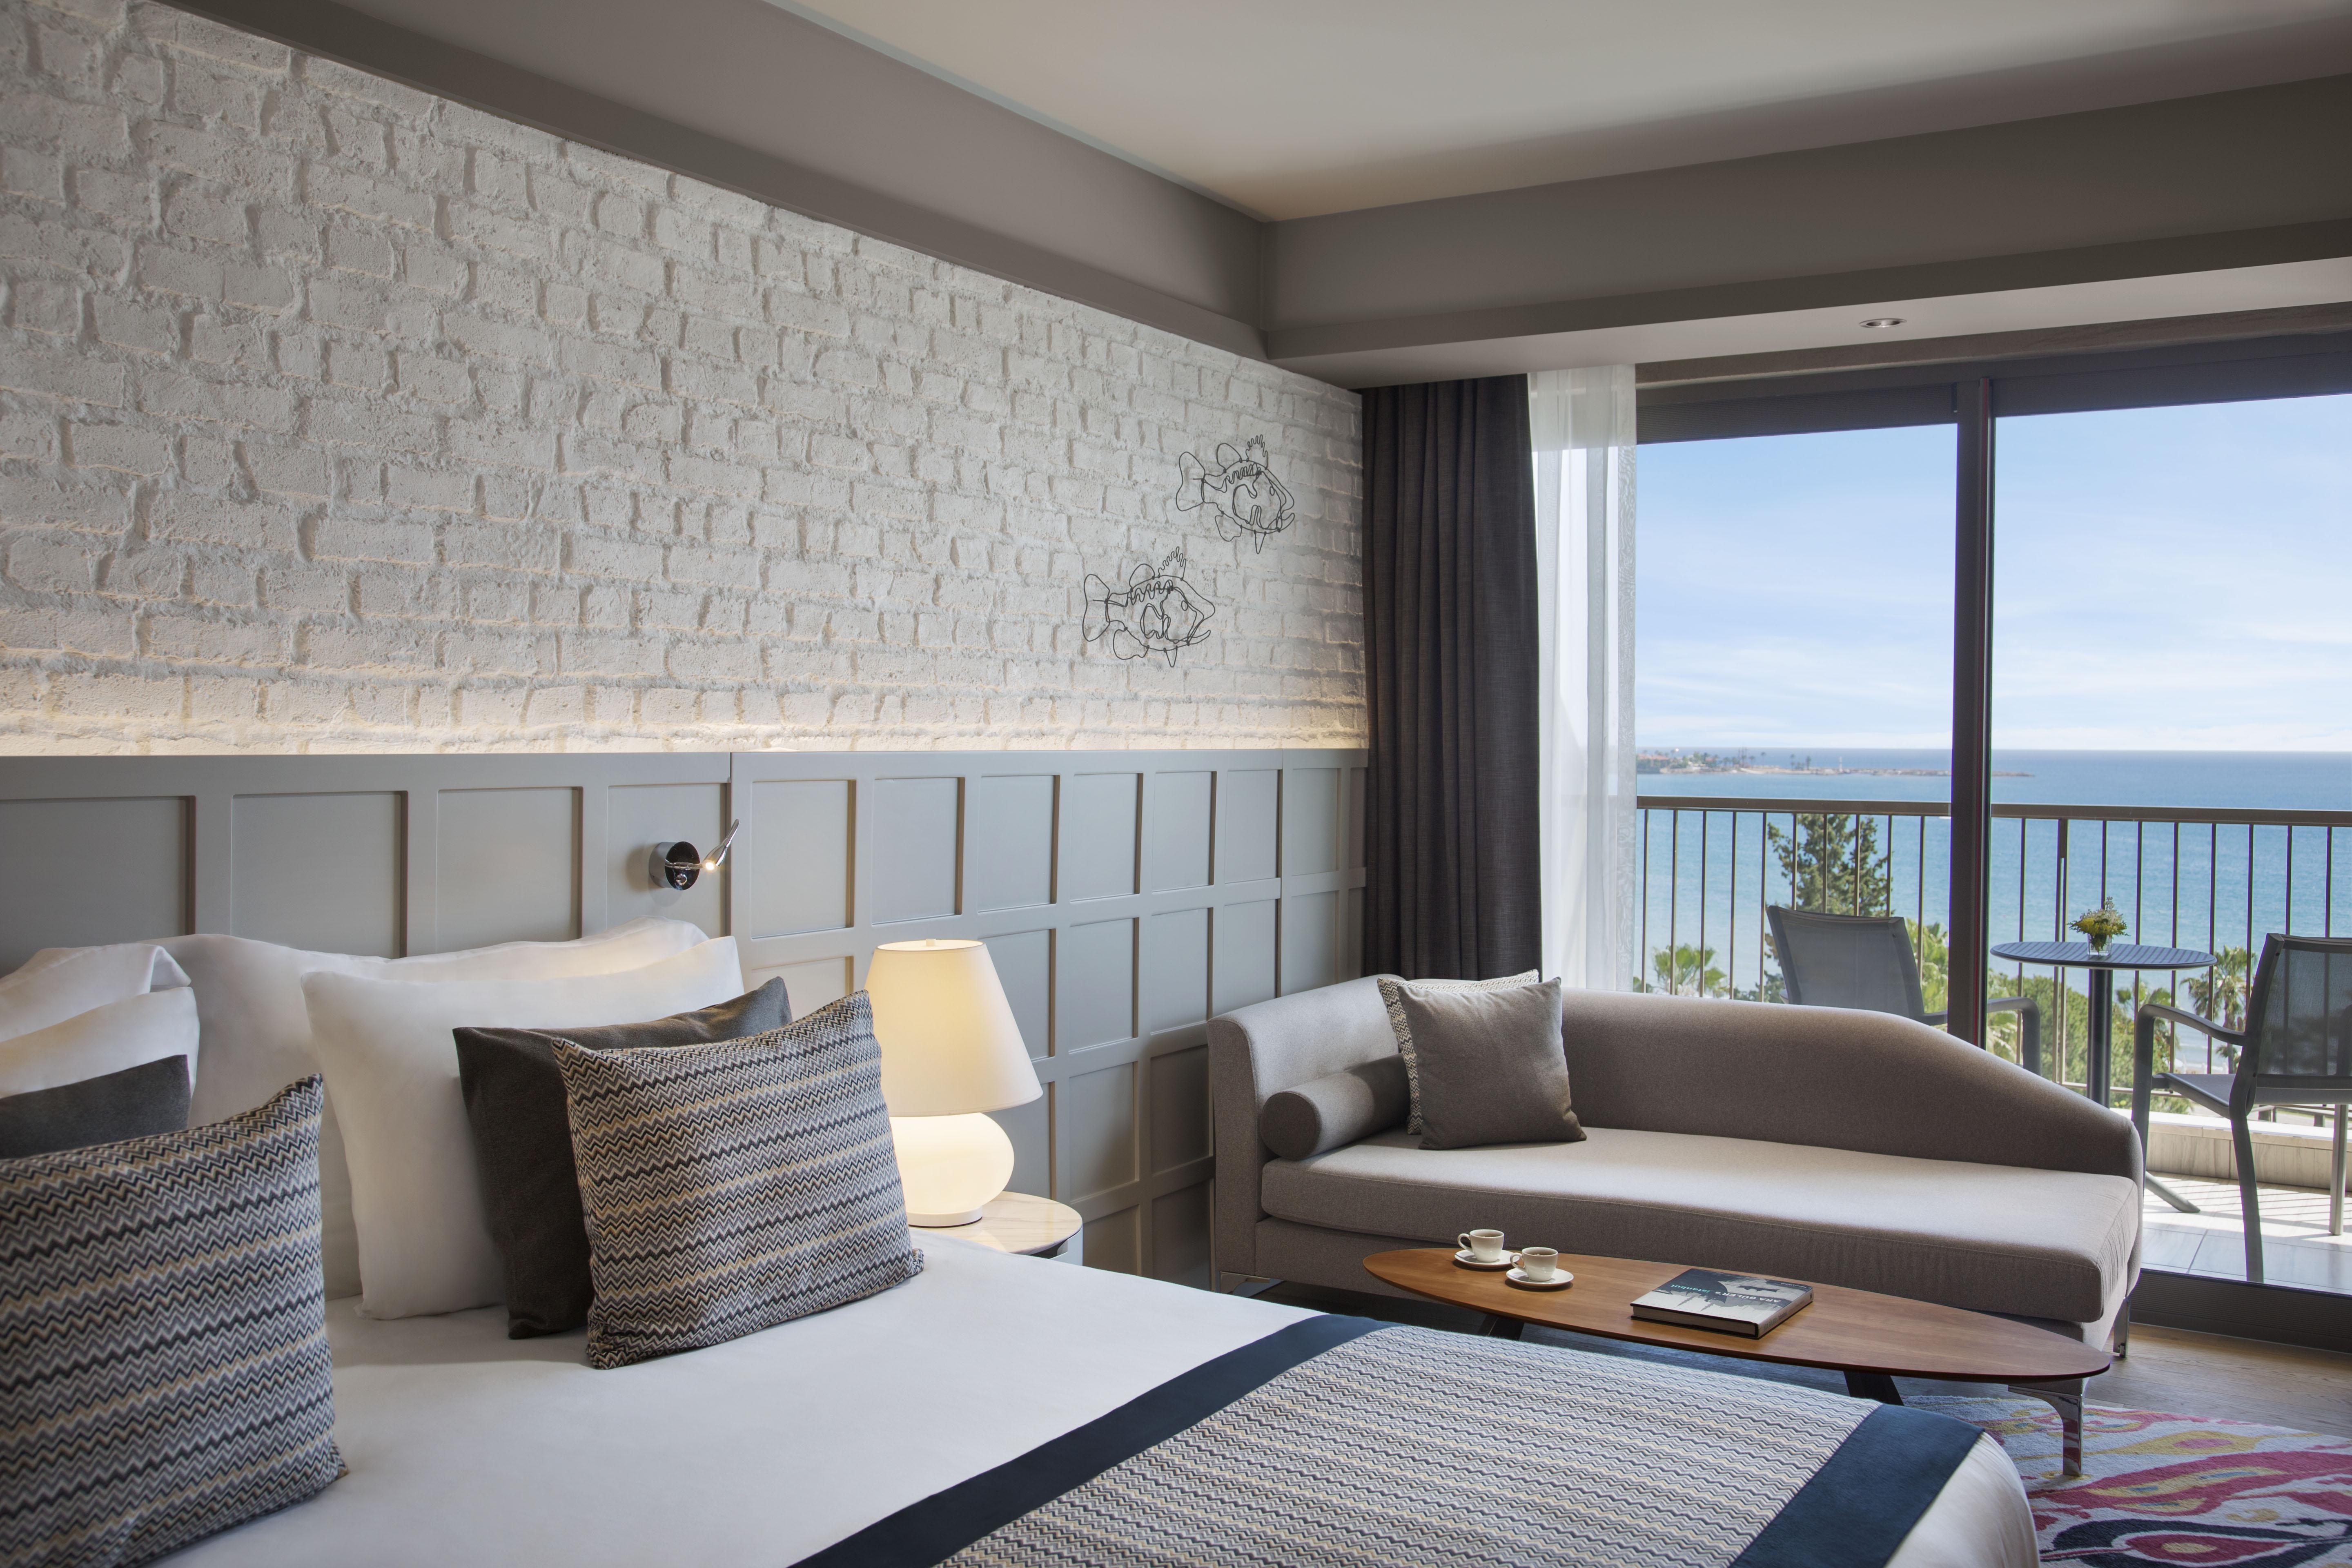 Acanthus cennet barut collection 5. Acanthus Cennet Barut collection Сиде. Acanthus Barut Hotels Cennet. Acanthus & Cennet Barut collection - Ultra all inclusive.